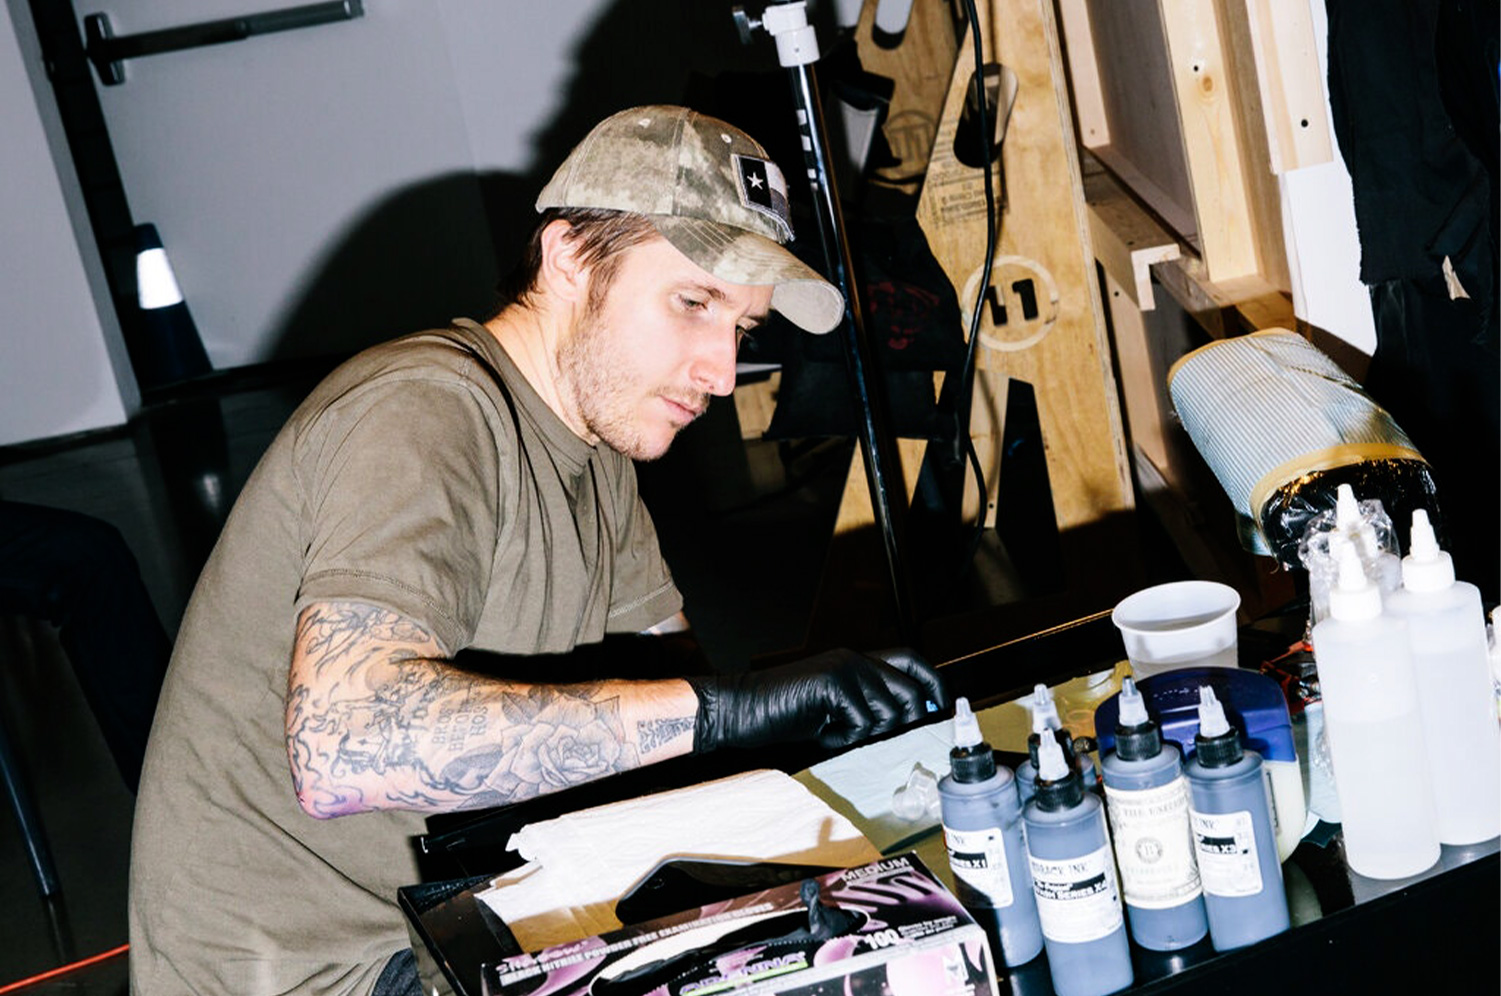 Campbell preparing his ink at a tattoo event in 2015.